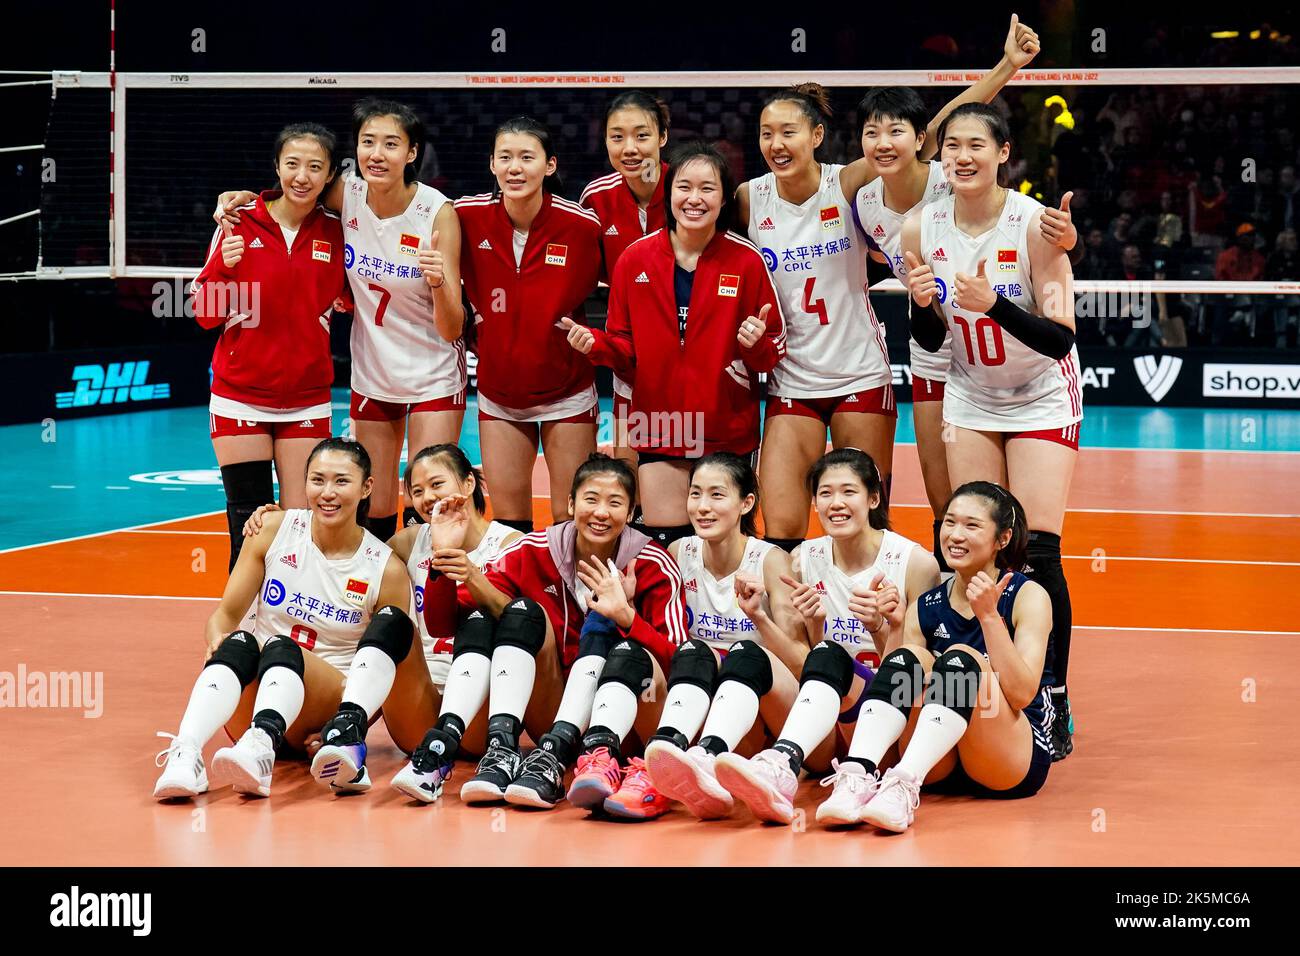 ROTTERDAM, NETHERLANDS - OCTOBER 9: Weiyi Wang of China, Peiyan Chen of China, Xia Ding of China, Yingying Li of China, Yizhu Wang of China, Yunlu Wang of China, Ye Jin of China, Yuanyuan Wang of China, Yi Gao of China, Hanyu Yang of China, Linyu Diao of China, Mengjie Wang of China and Xinyue Yuan of China celebrate their win during the Pool E Phase 2 match between China and Belgium on Day 16 of the FIVB Volleyball Womens World Championship 2022 at the Rotterdam Ahoy on October 9, 2022 in Rotterdam, Netherlands (Photo by Rene Nijhuis/Orange Pictures) Stock Photo